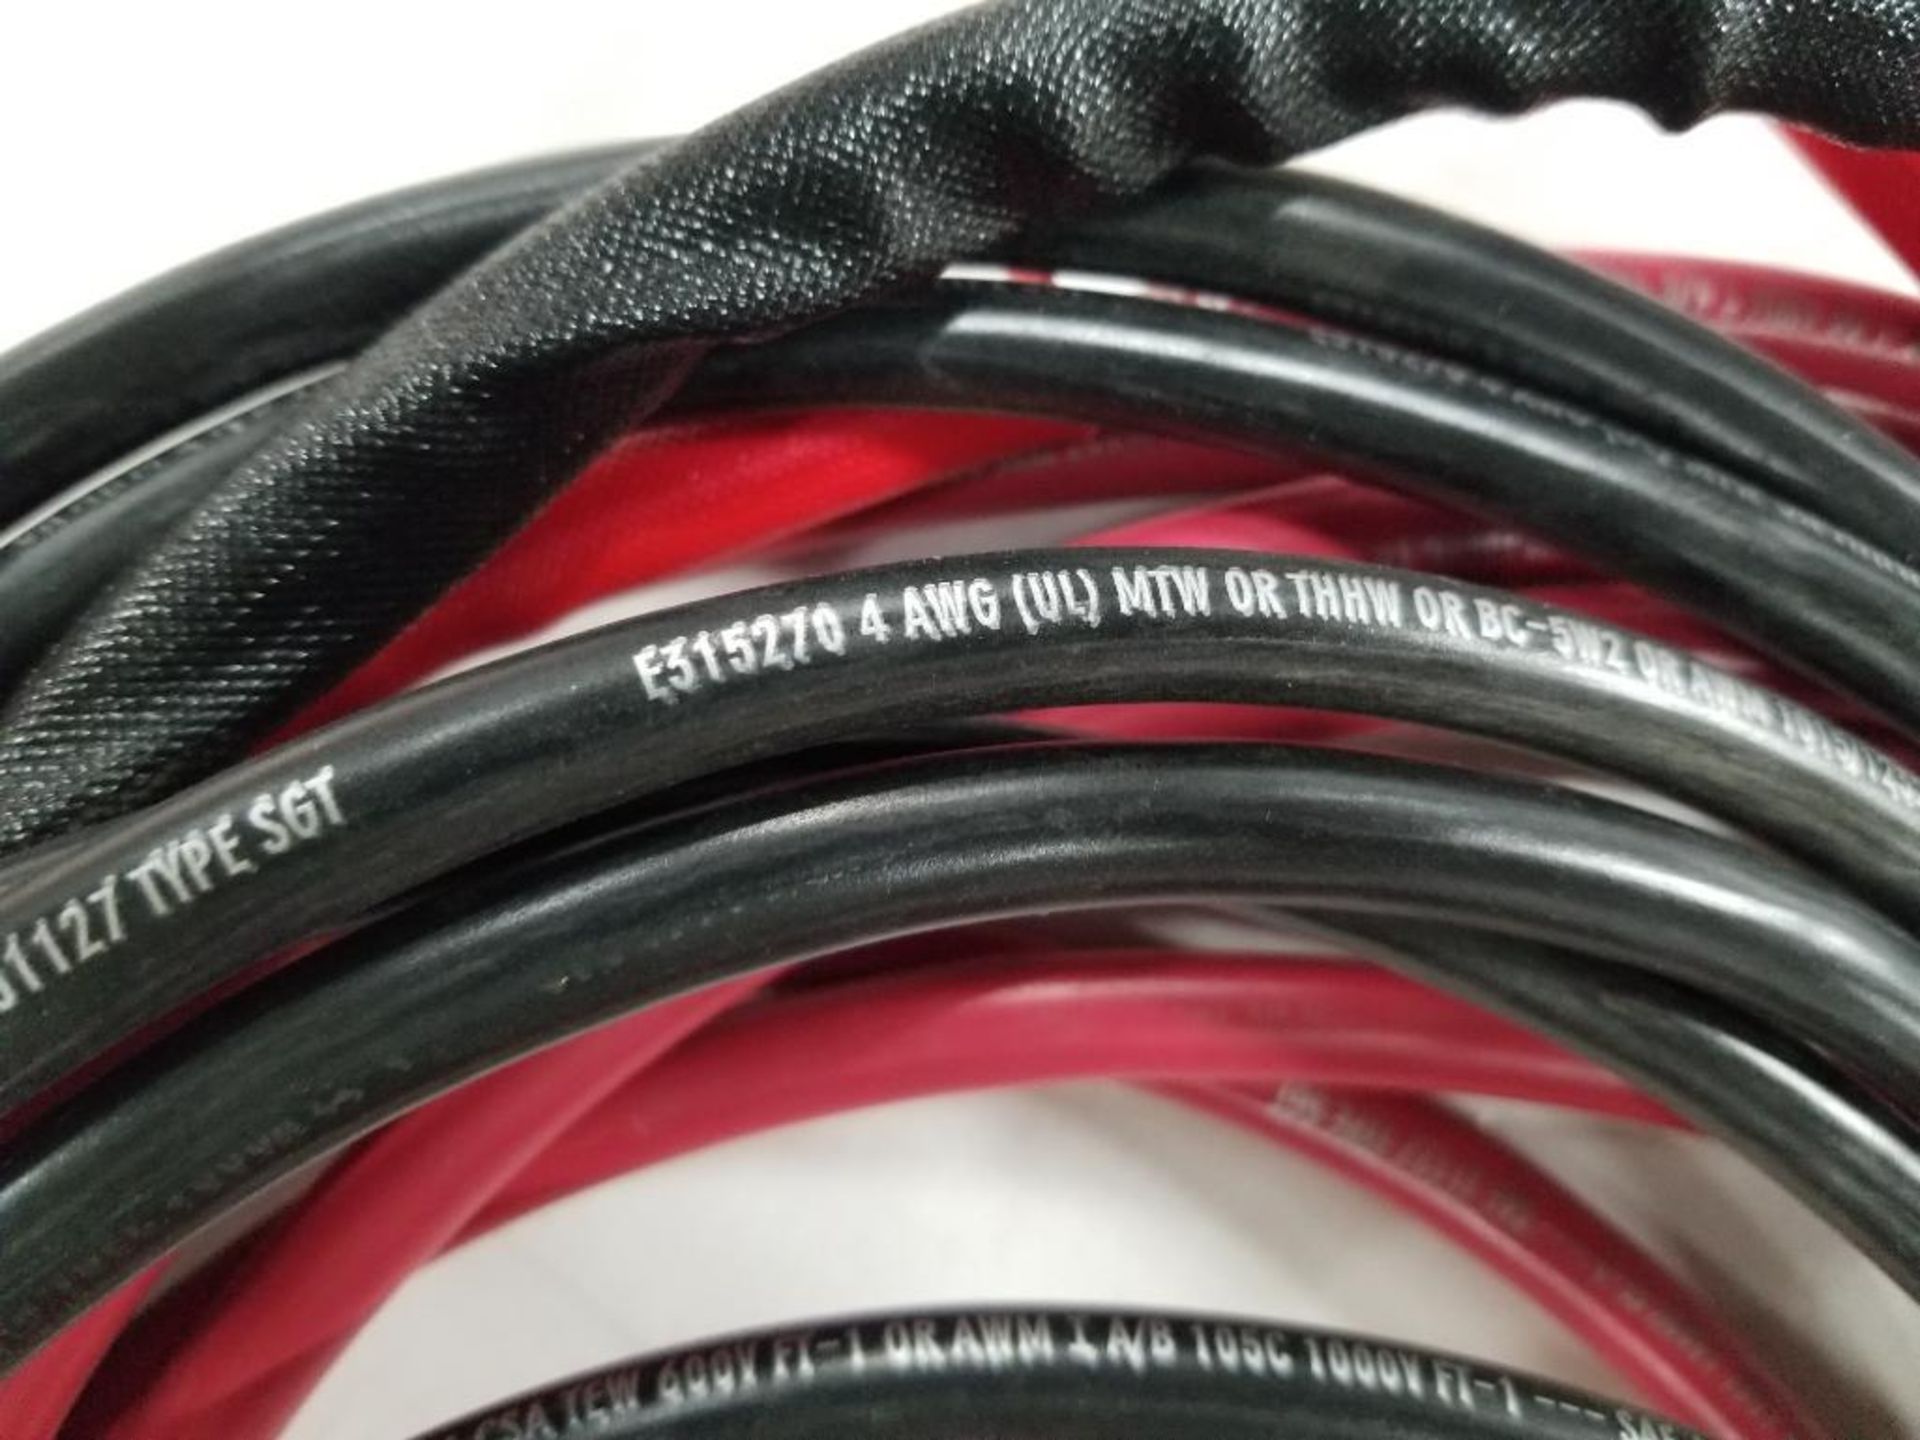 Qty 15 - Anderson 23ft battery adapter cable. RBARA23FT4-G1. 175A, 600V plug. New in box. - Image 5 of 5